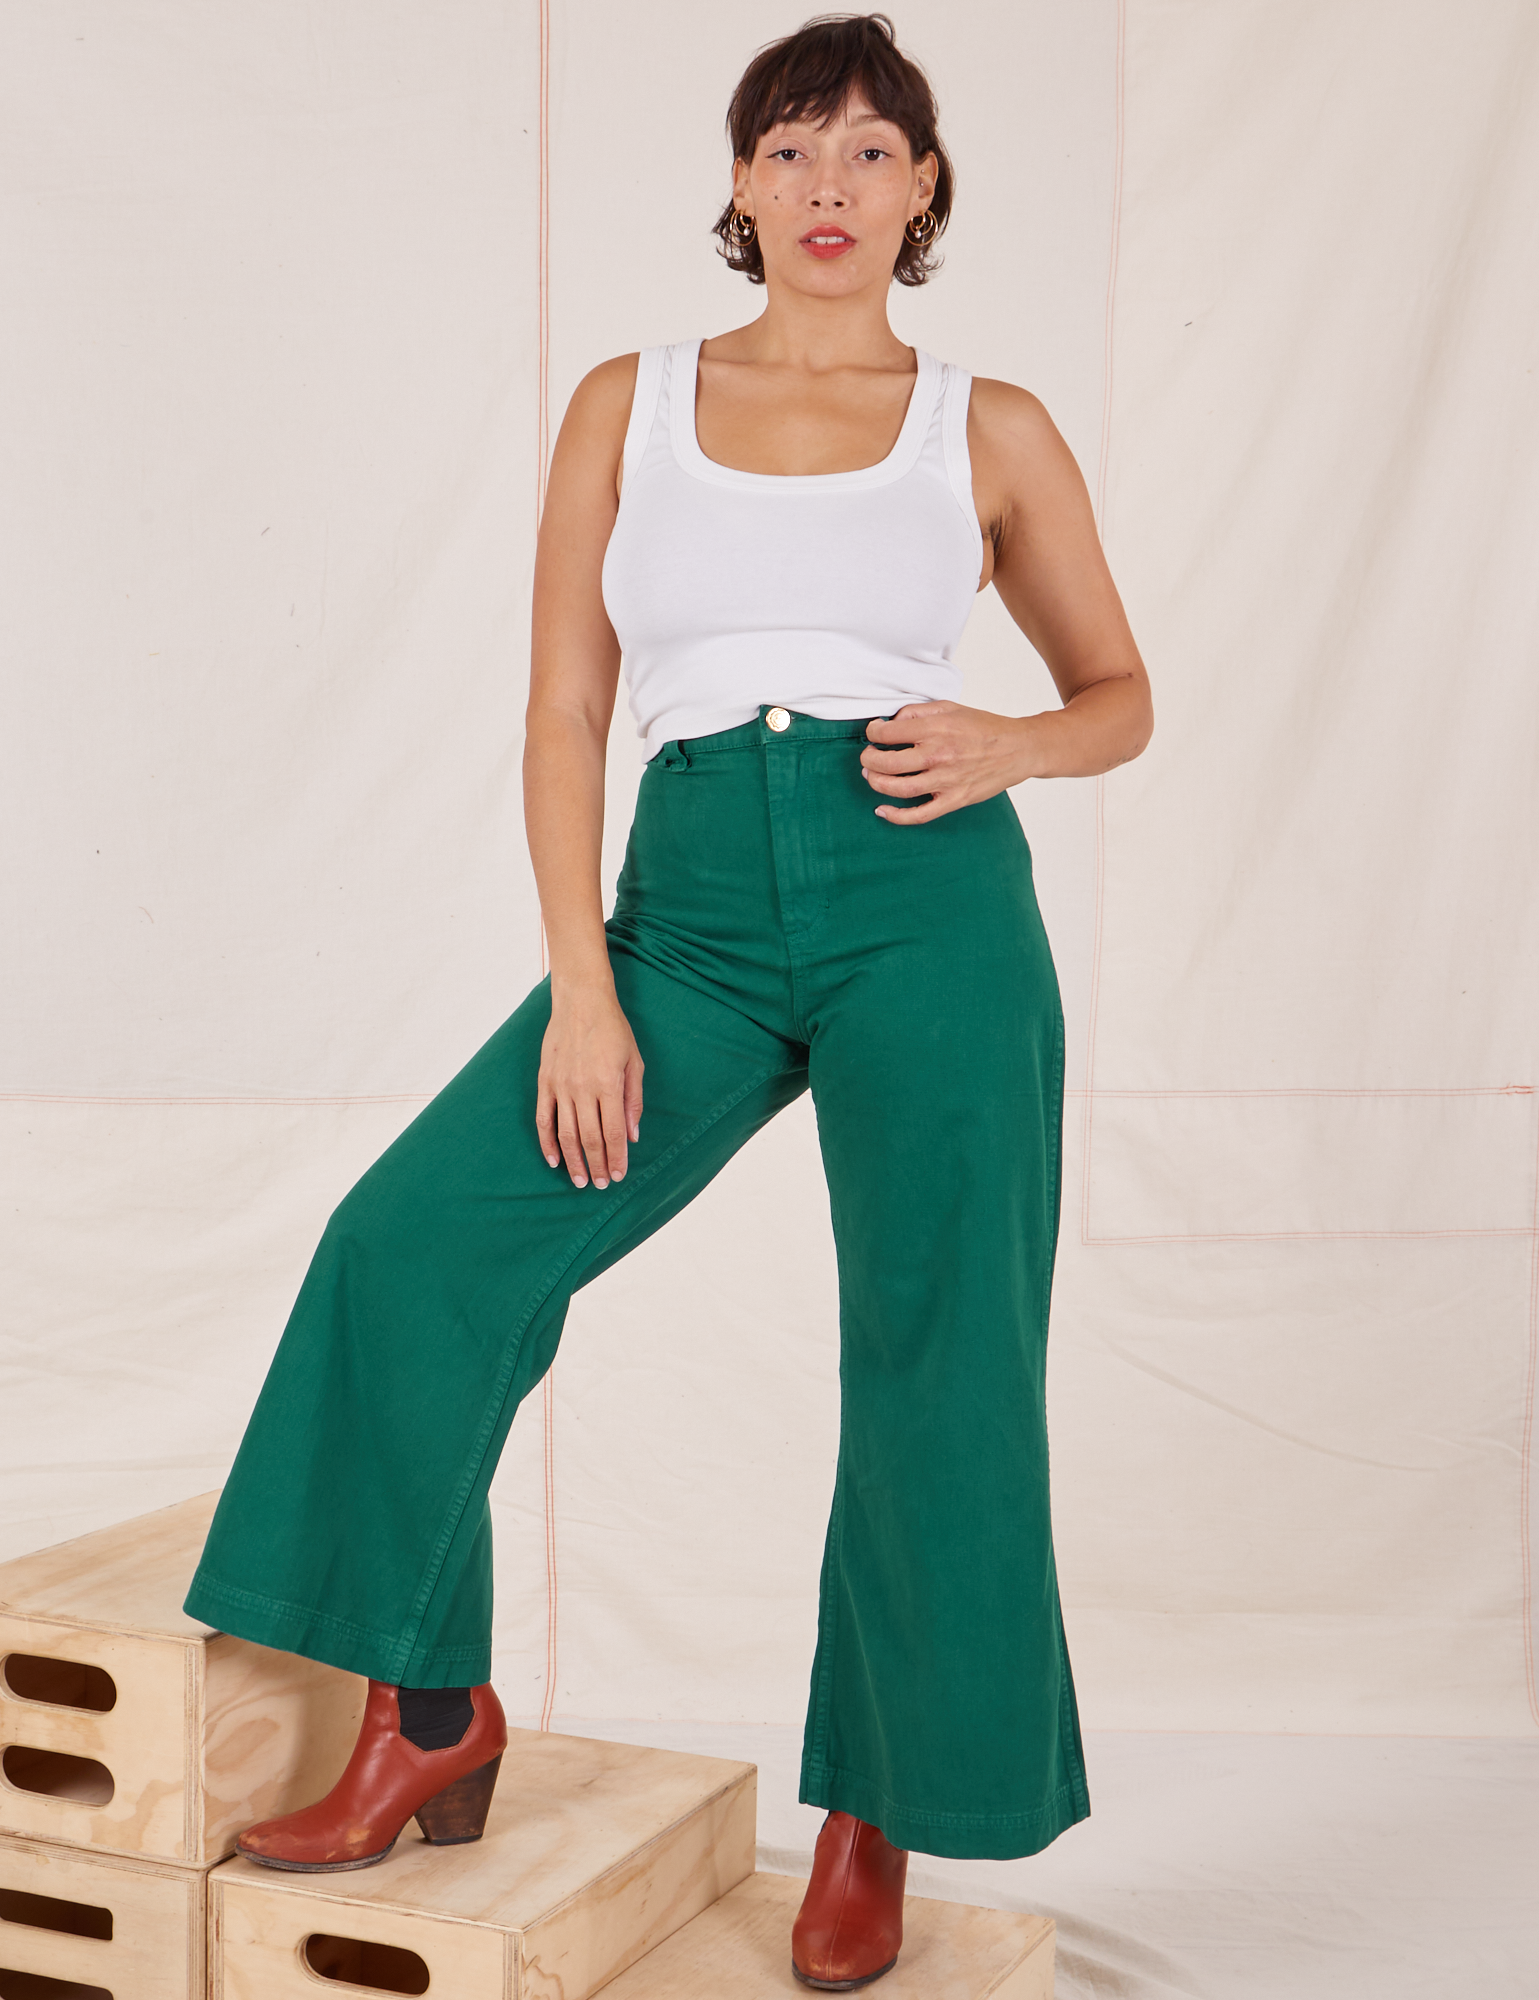 Tiara is 5'4" and wearing XS Bell Bottoms in Hunter Green paired with Tank Top in vintage tee off-white